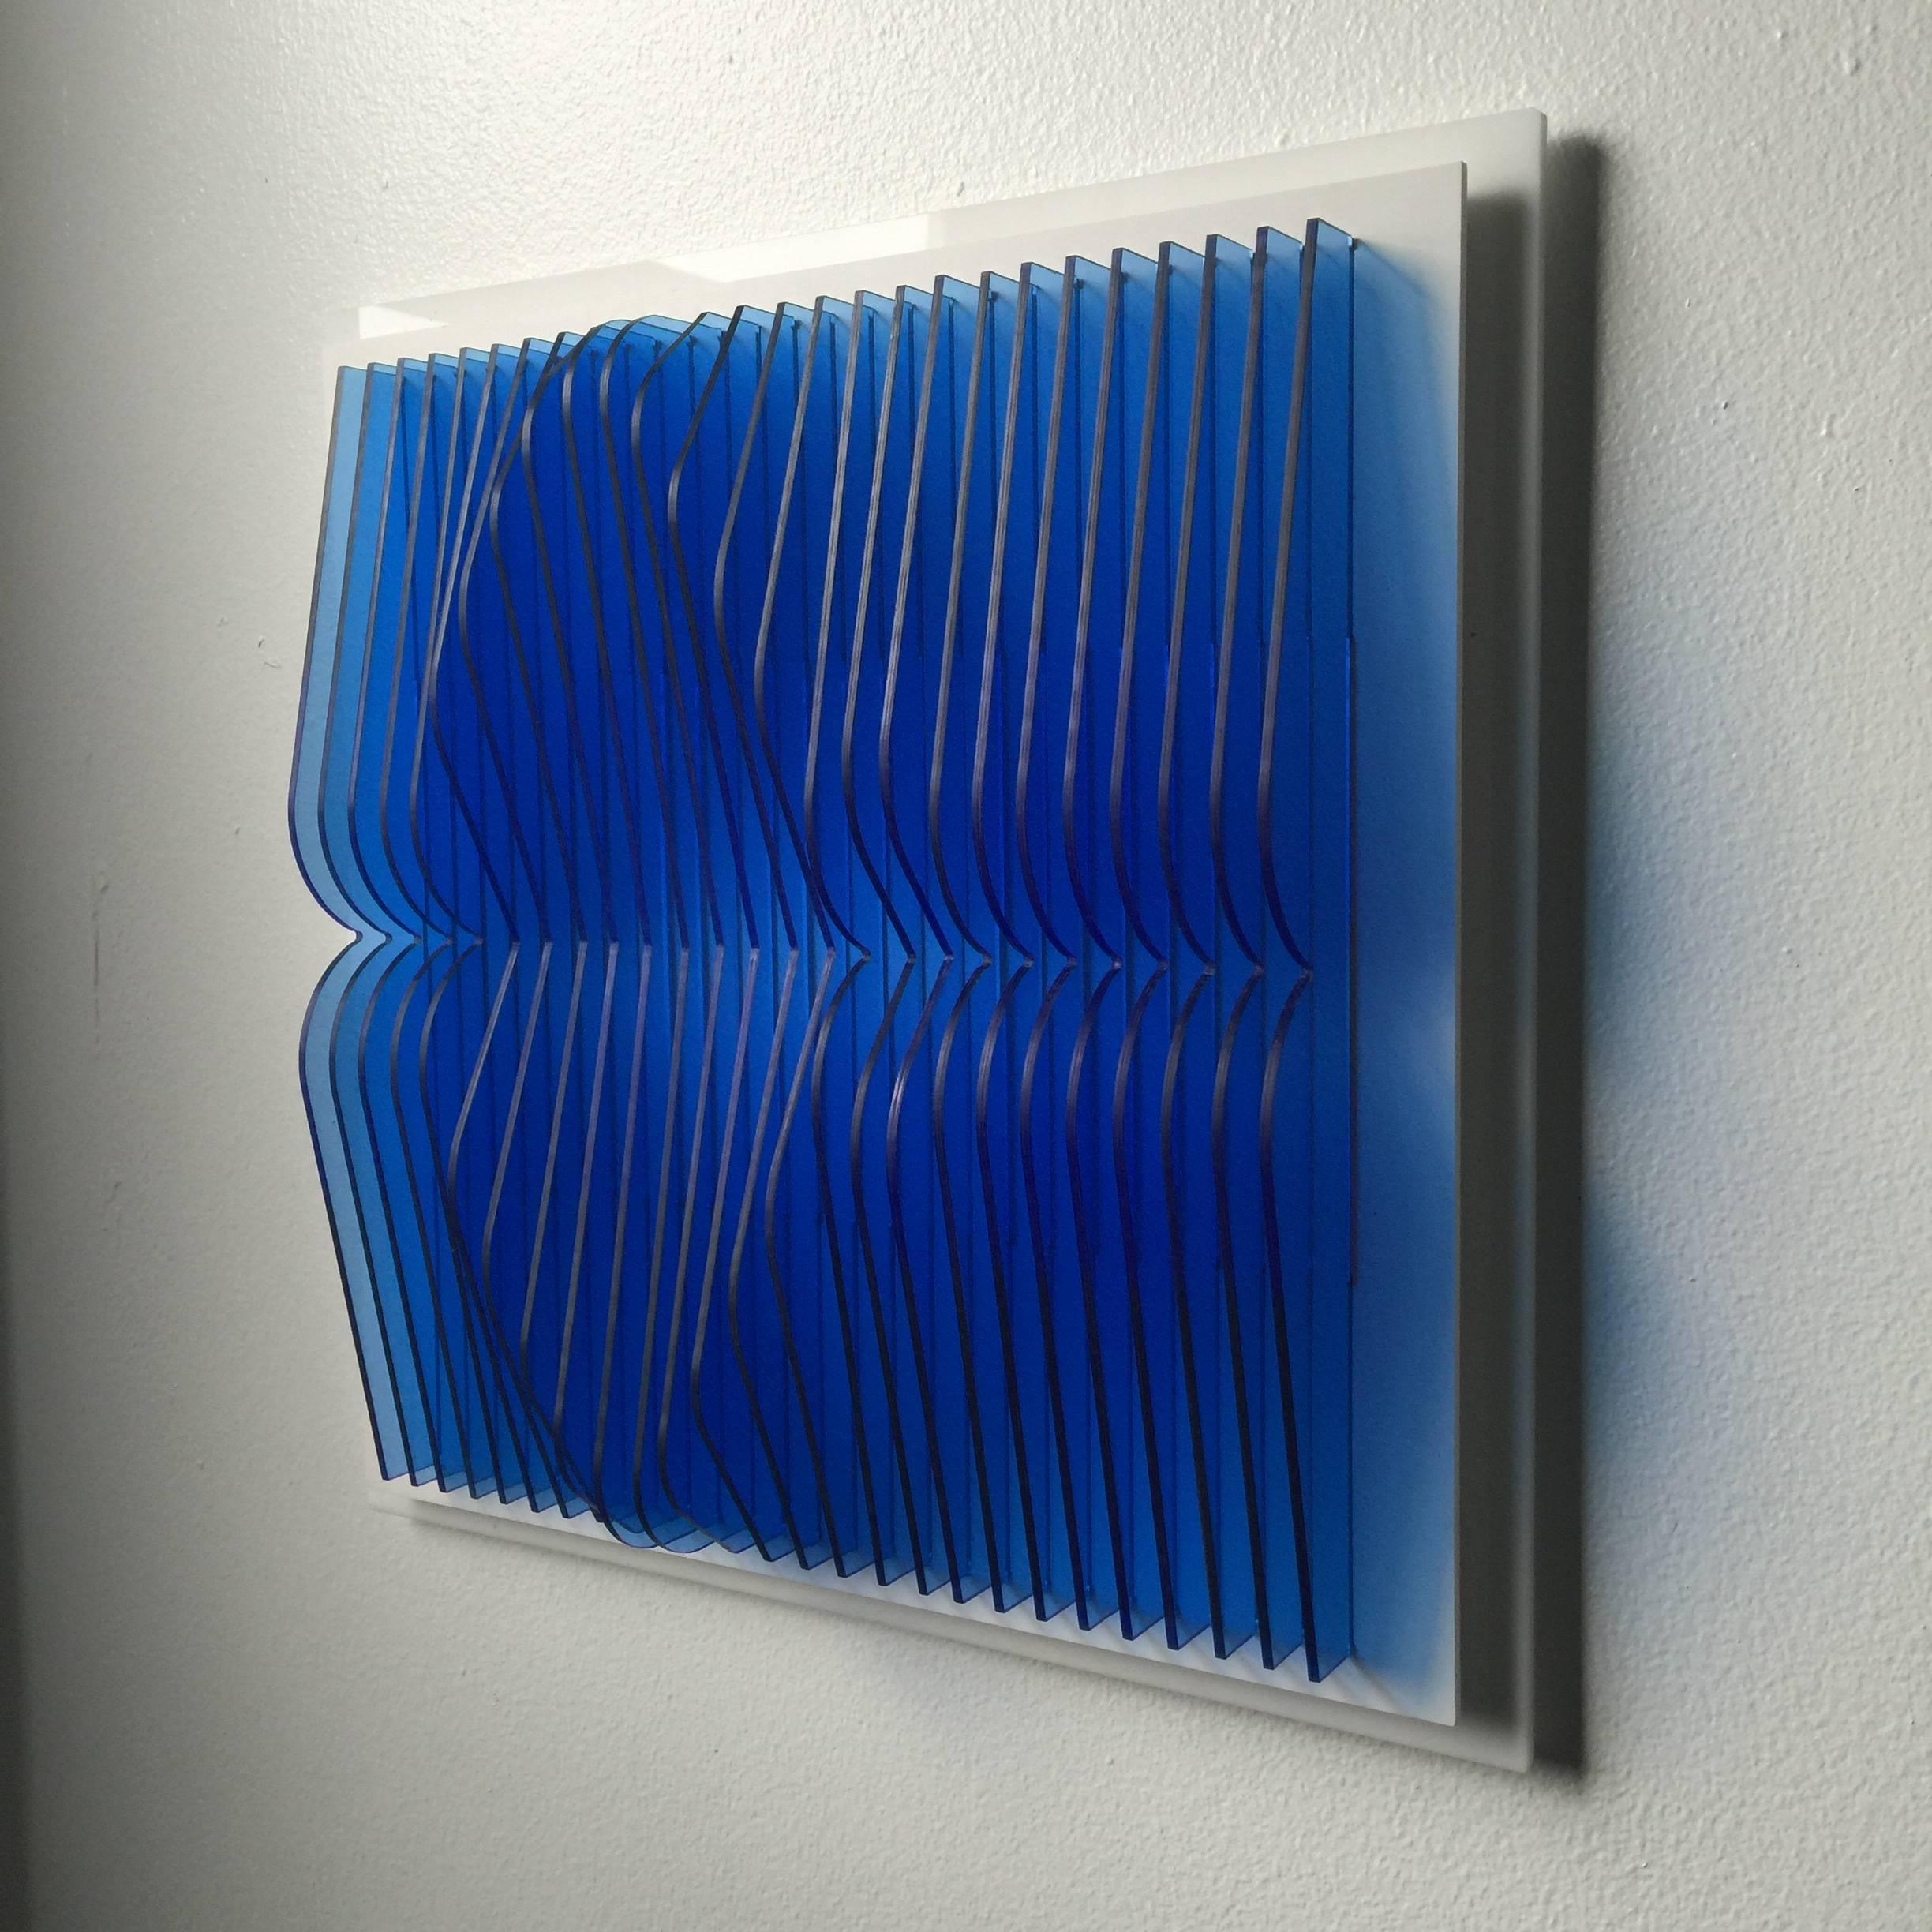 Trans Blue Pond - kinetic wall sculpture by J. Margulis - Art by Jose Margulis